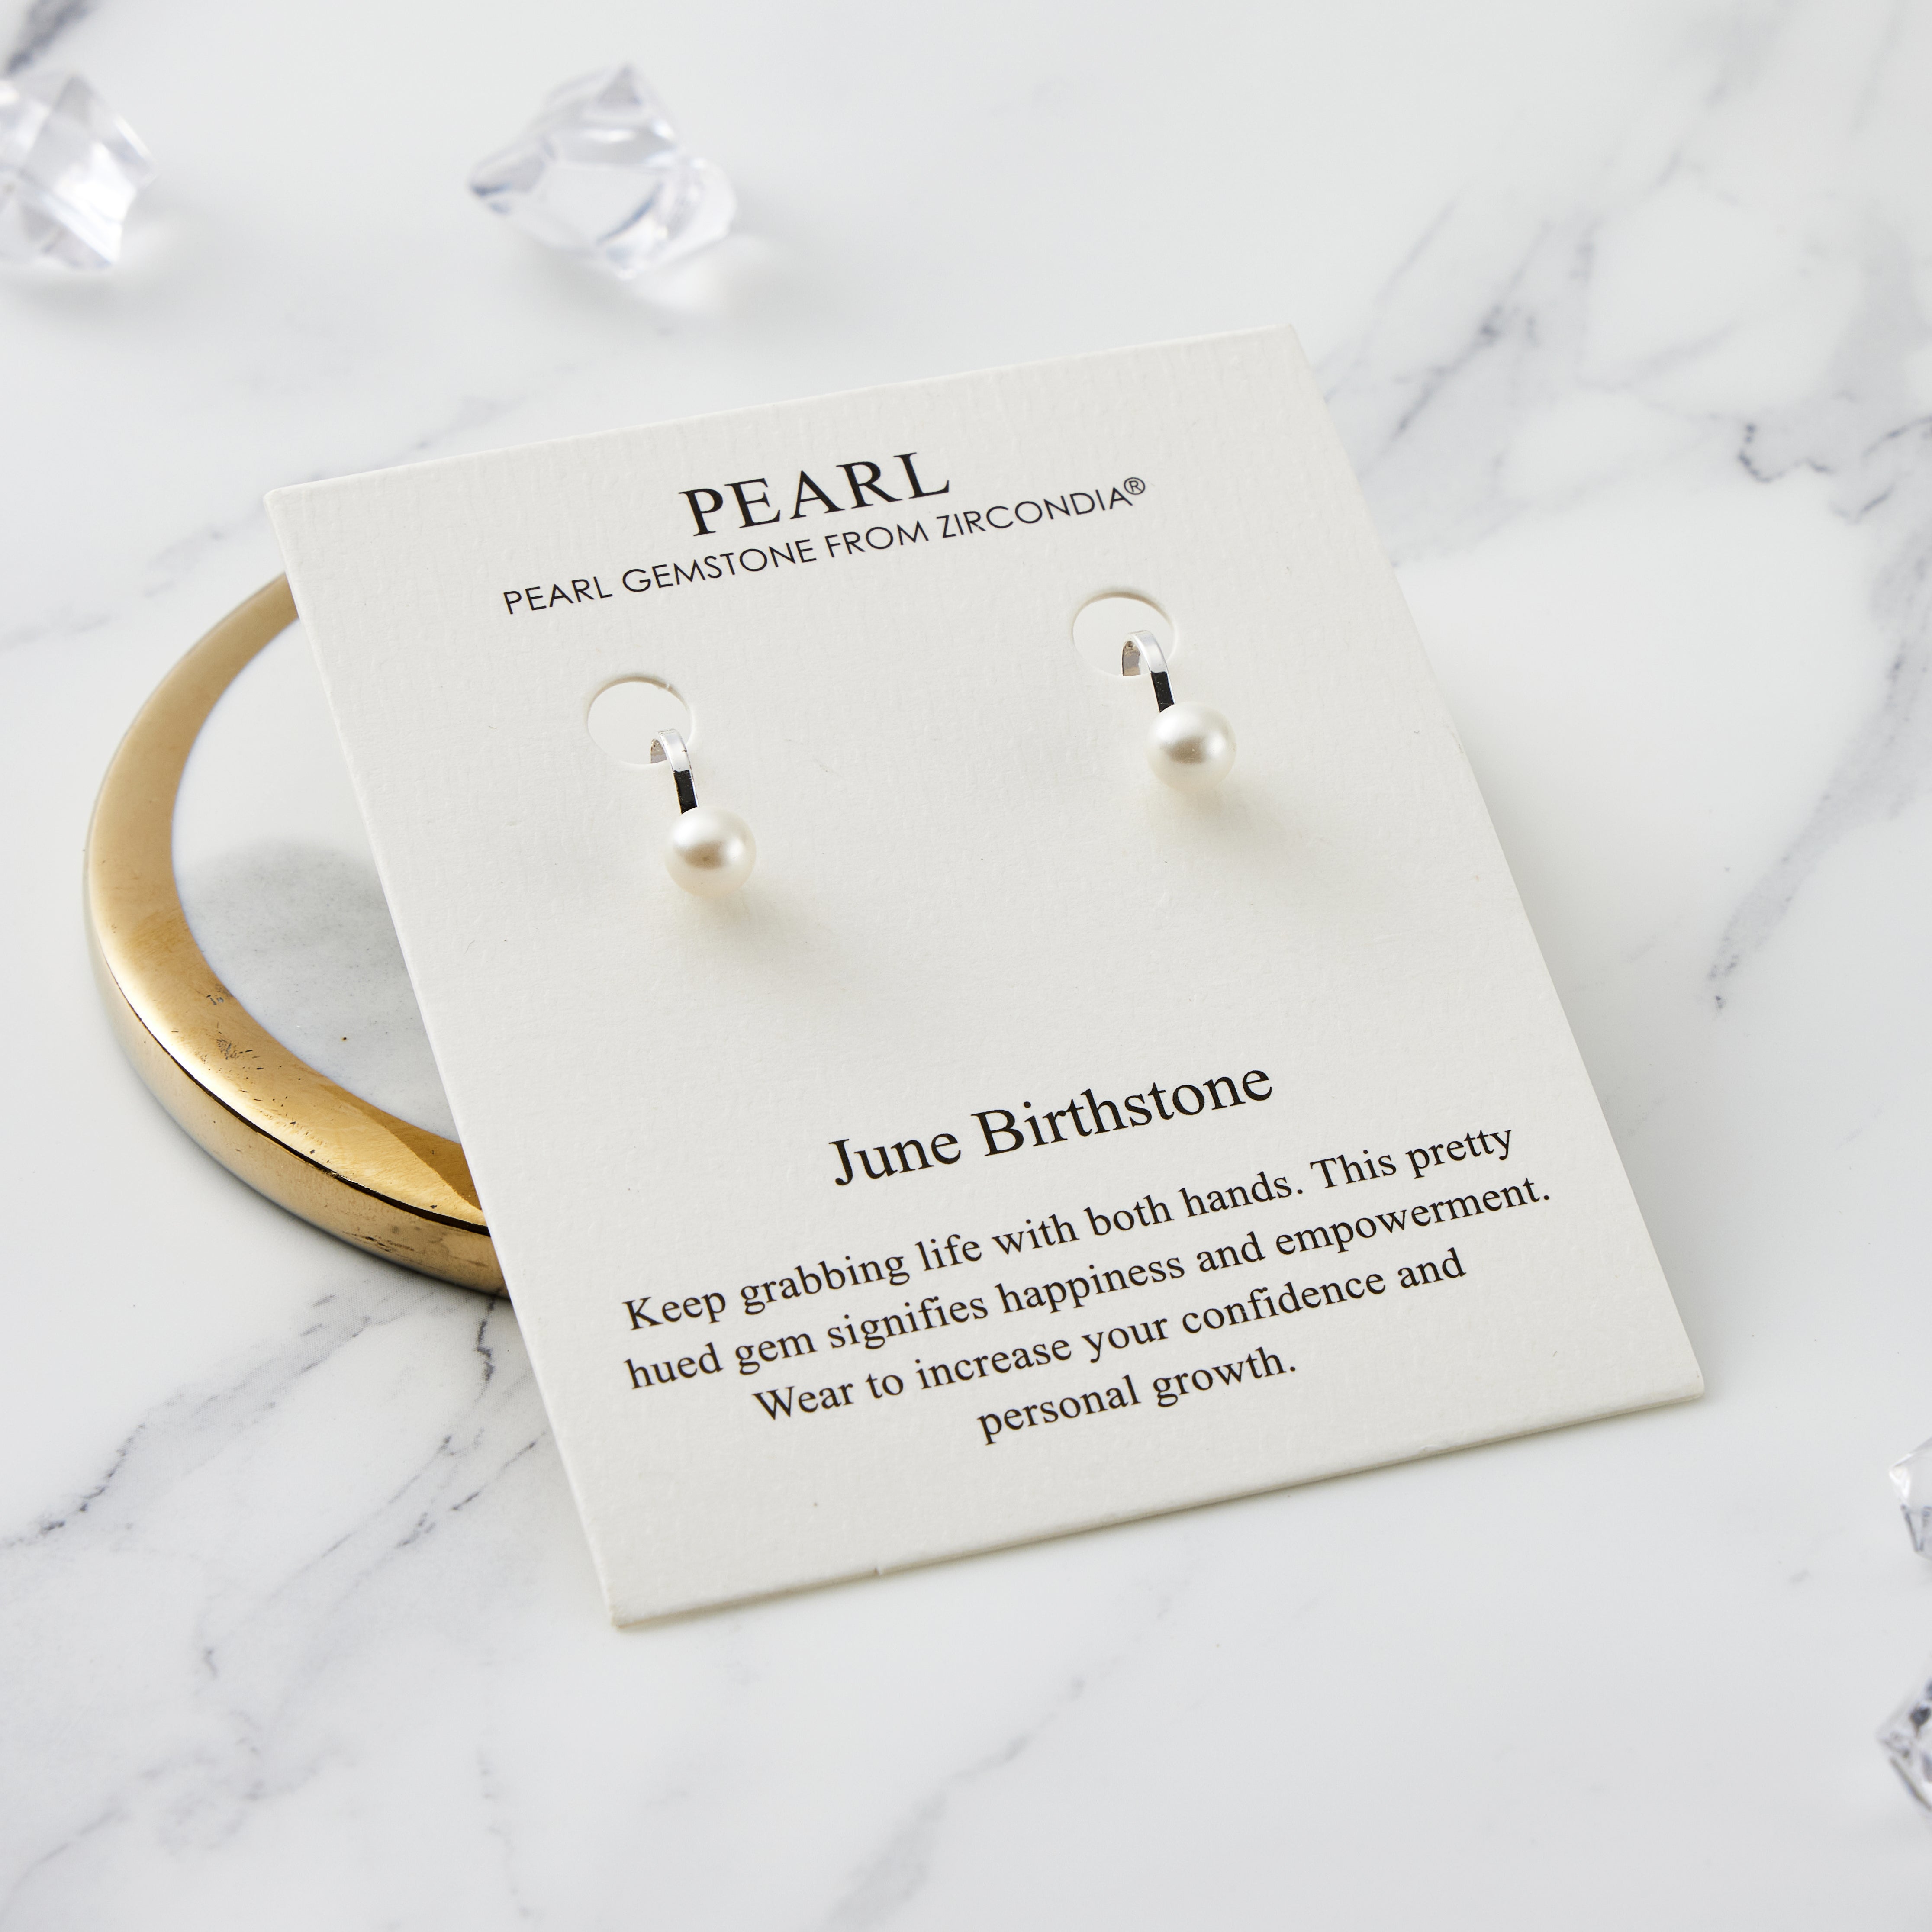 June (Pearl) Birthstone Clip On Earrings Created with Gemstones from Zircondia®